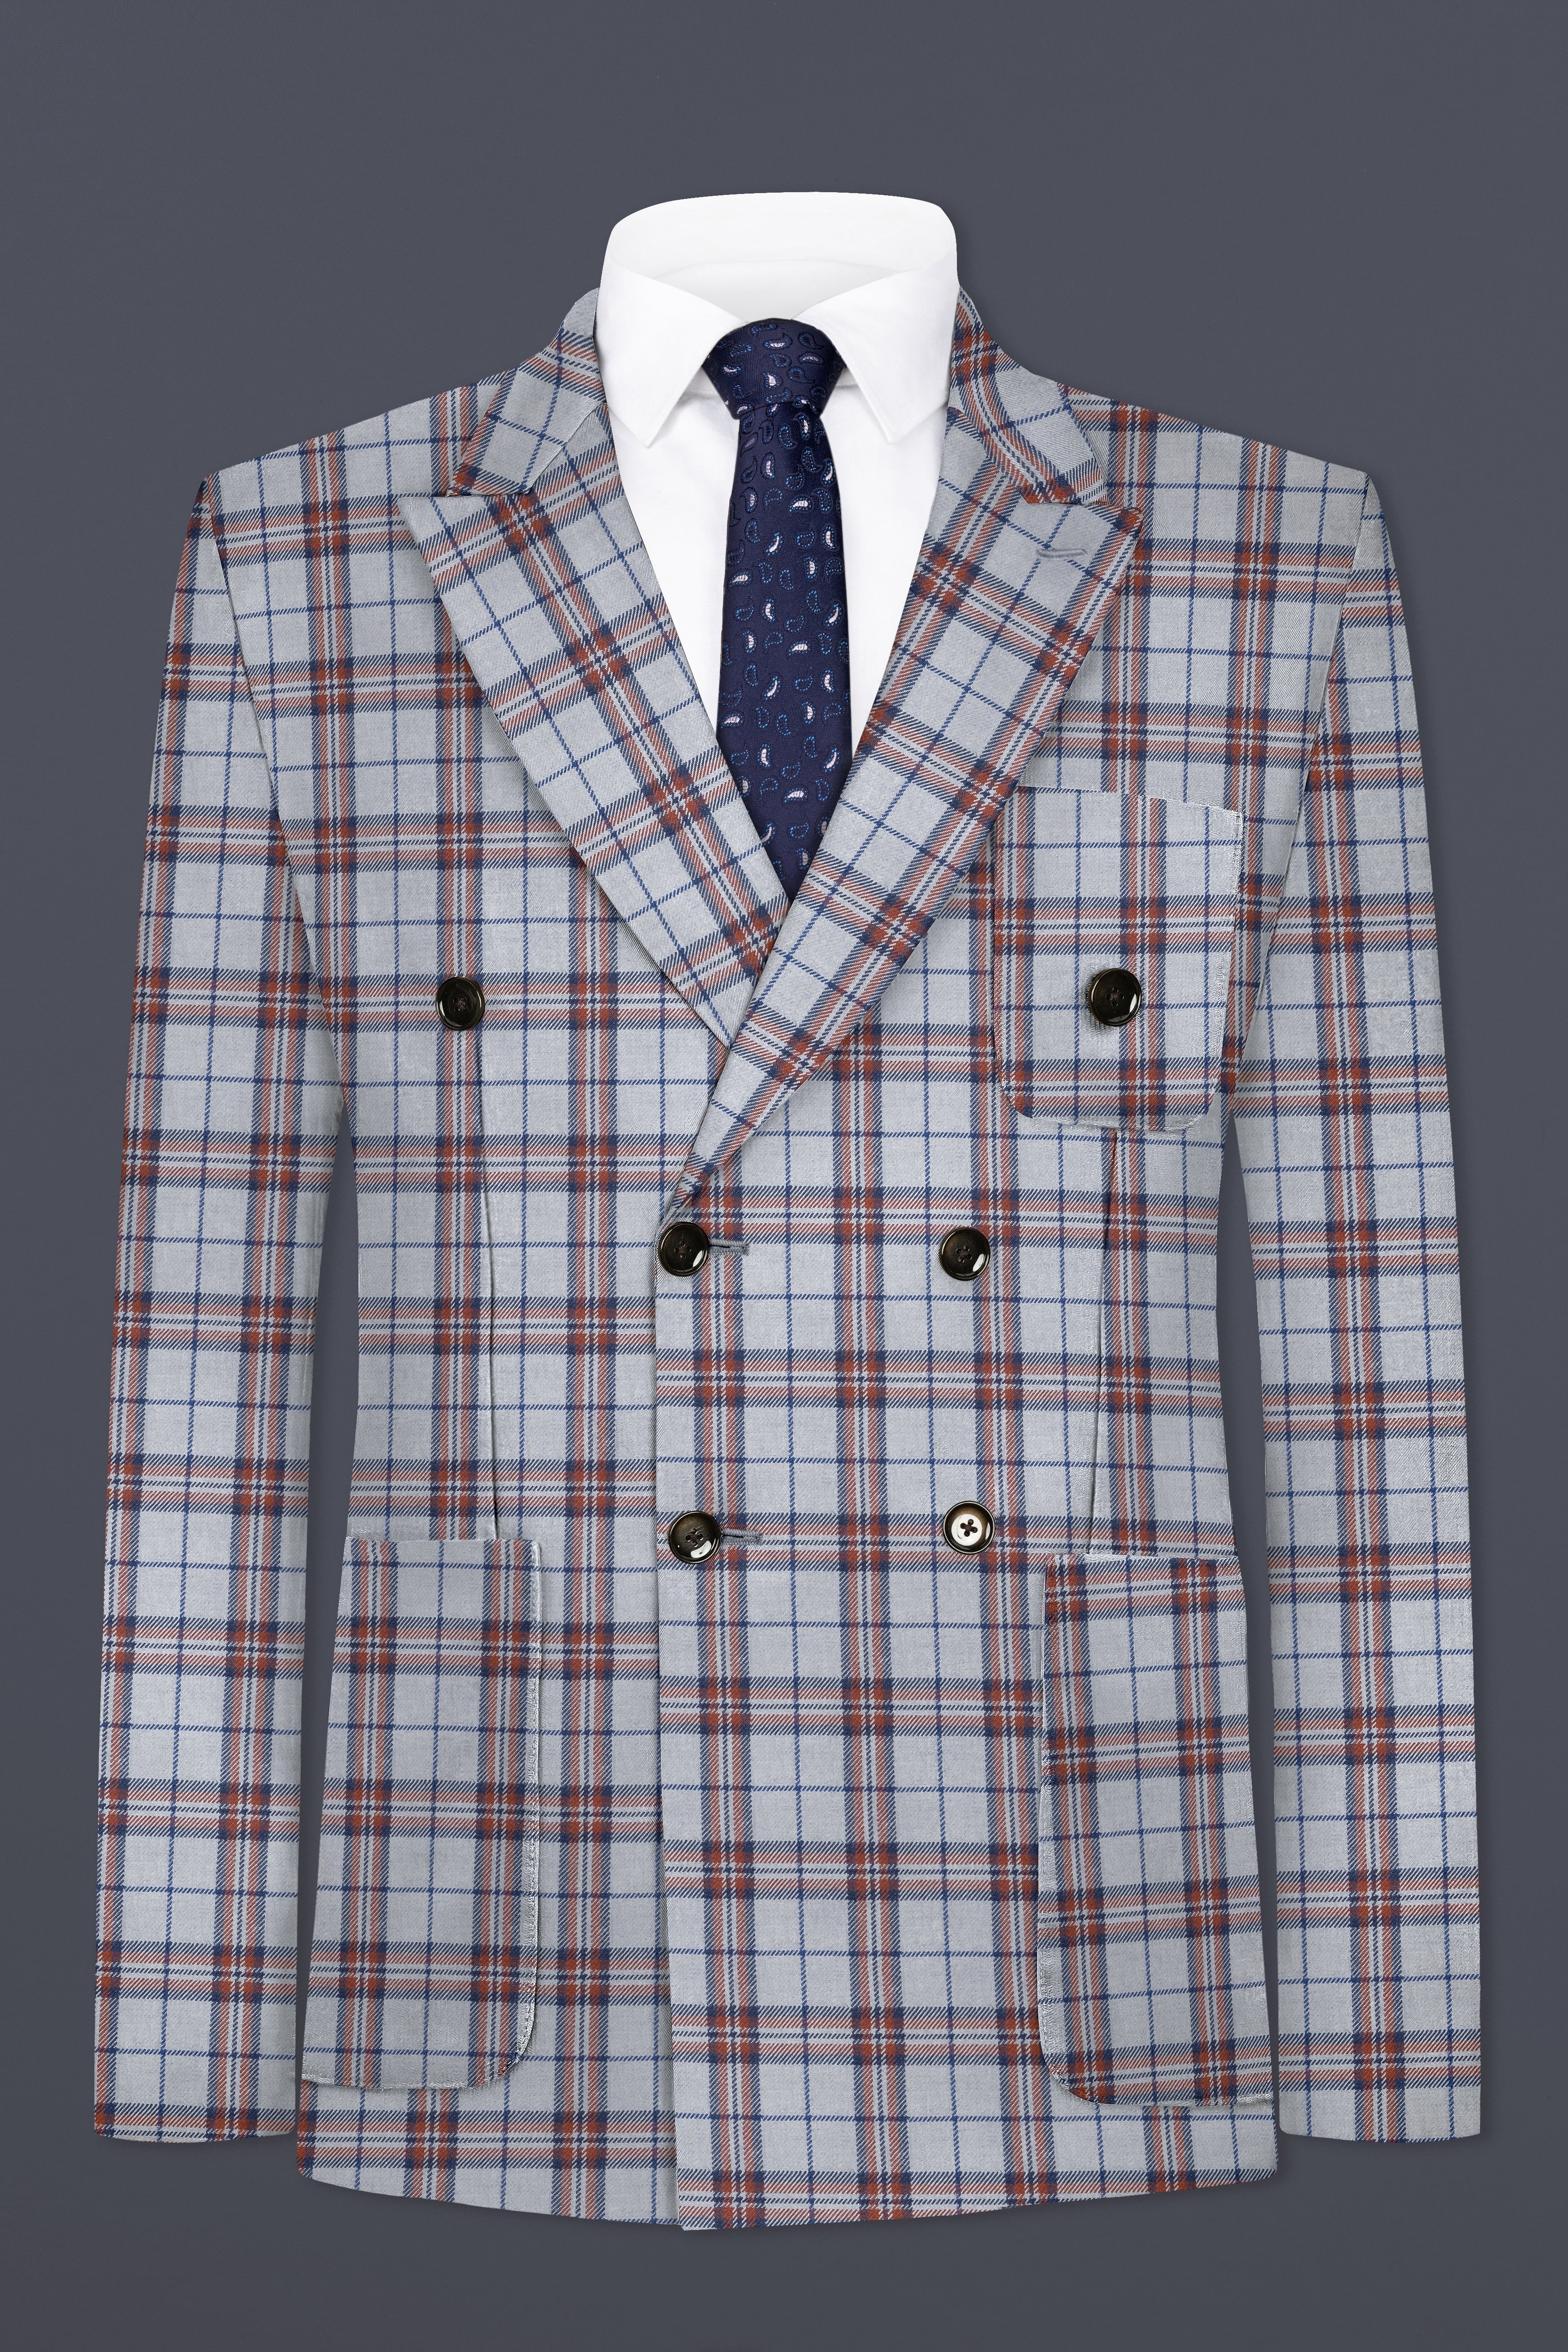 Cadet Grey with Maroon and Blue Plaid Double Breasted Tweed Suit